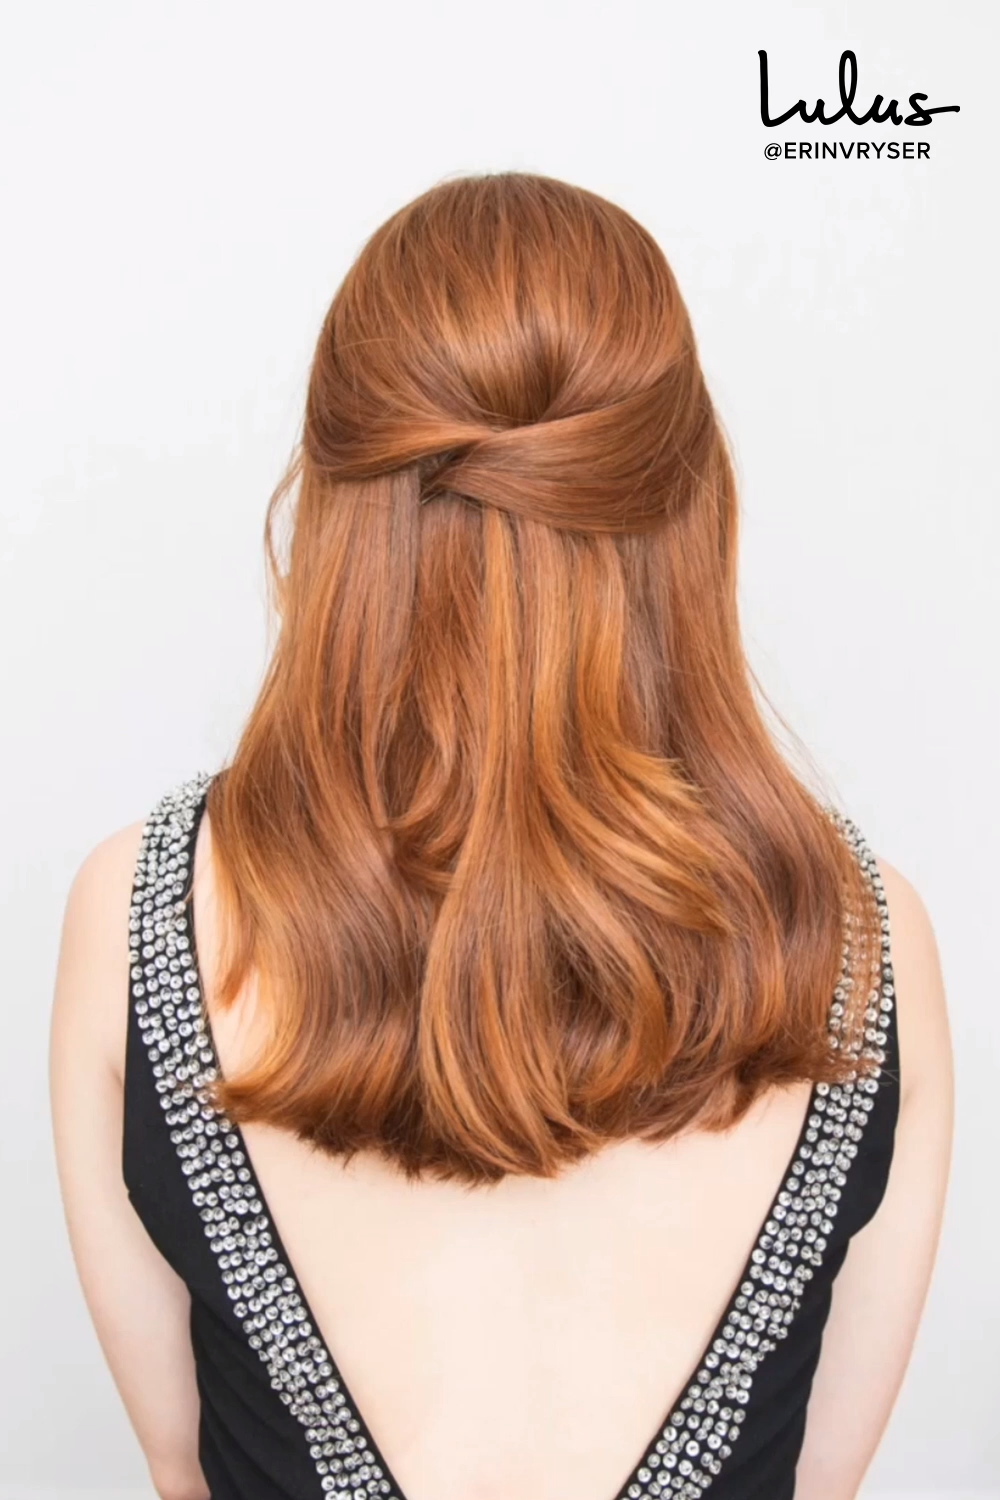 Hair How-To: This Criss-Cross Half-Up Hairstyle is Your Party Season Secret Weapon -   15 hairstyles Prom half up ideas